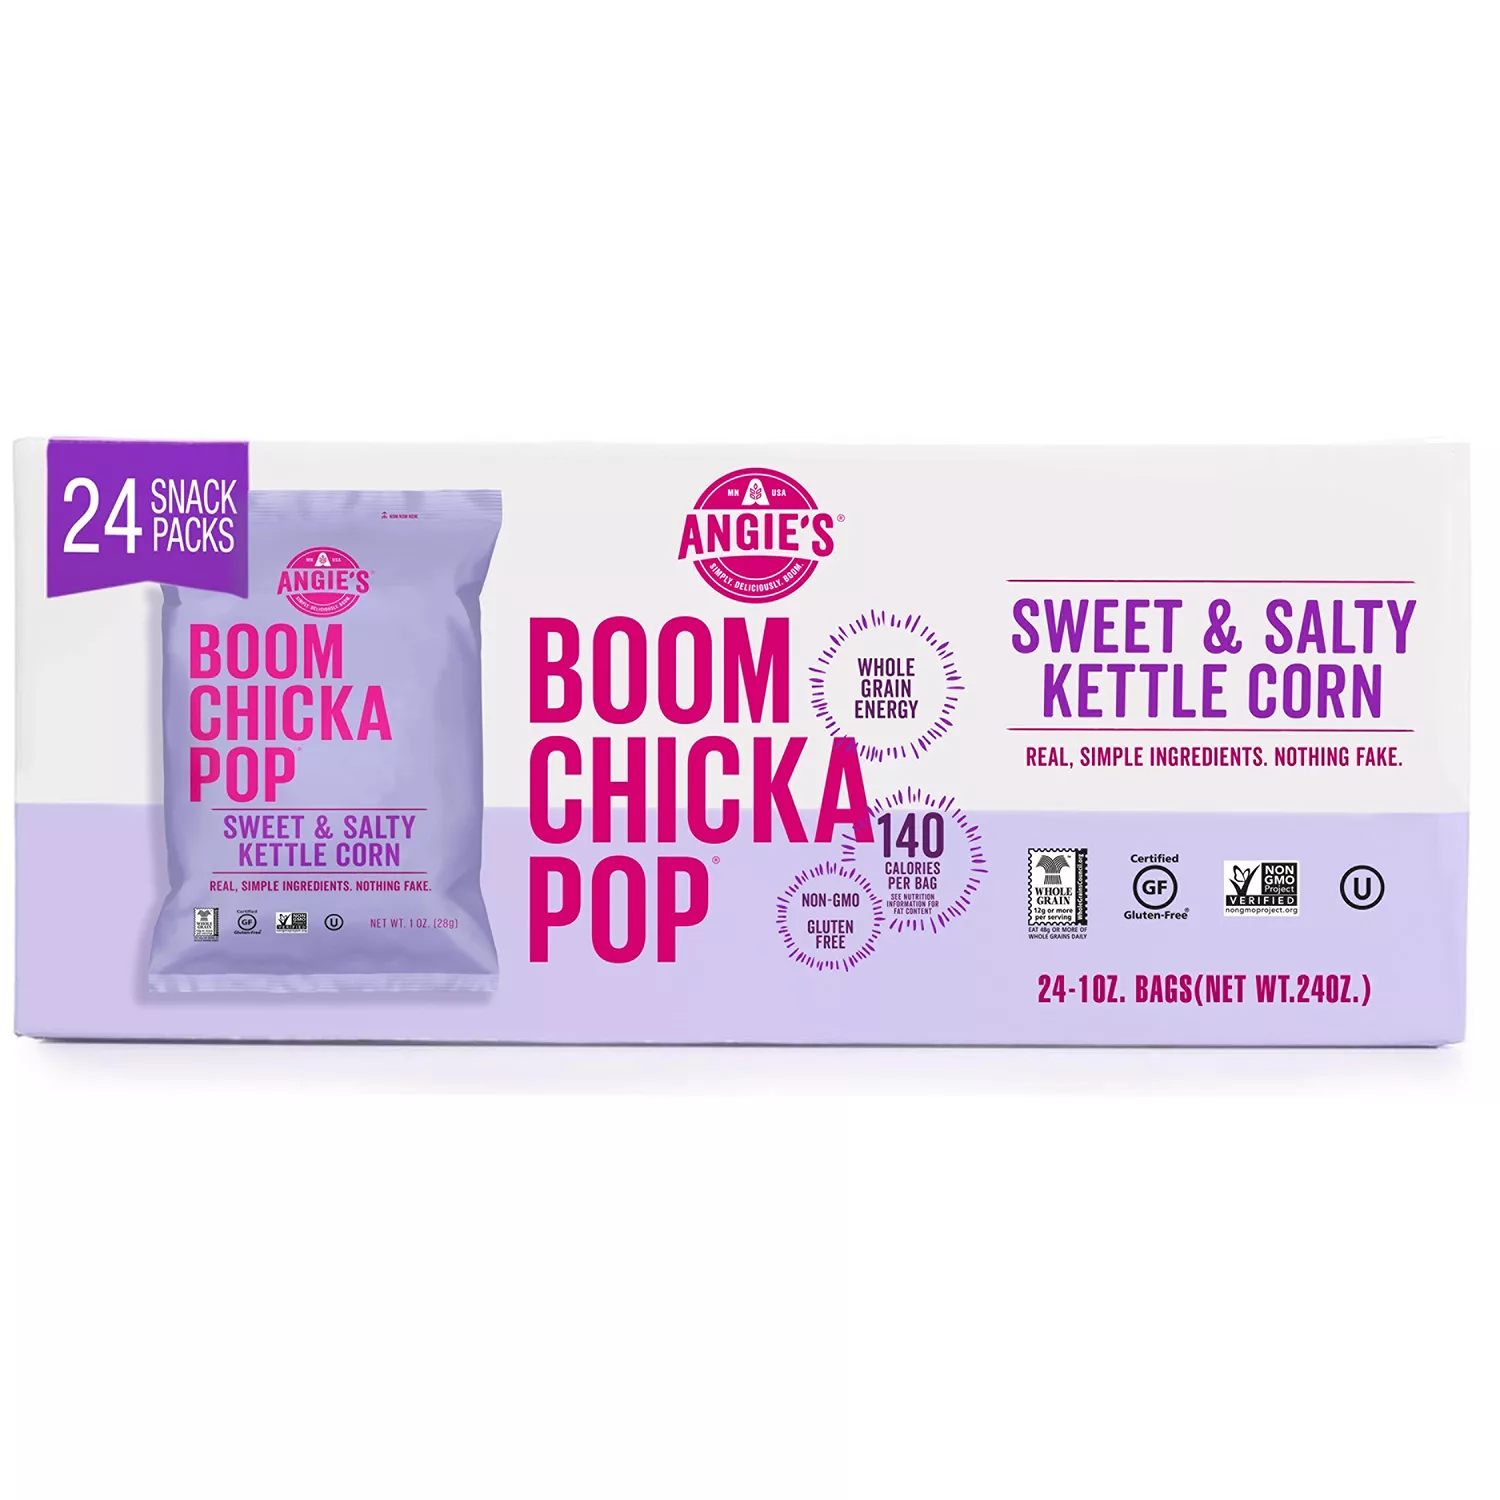 Angie’s Boom Chicka Pop Vendpack (1 oz., 24 ct.)